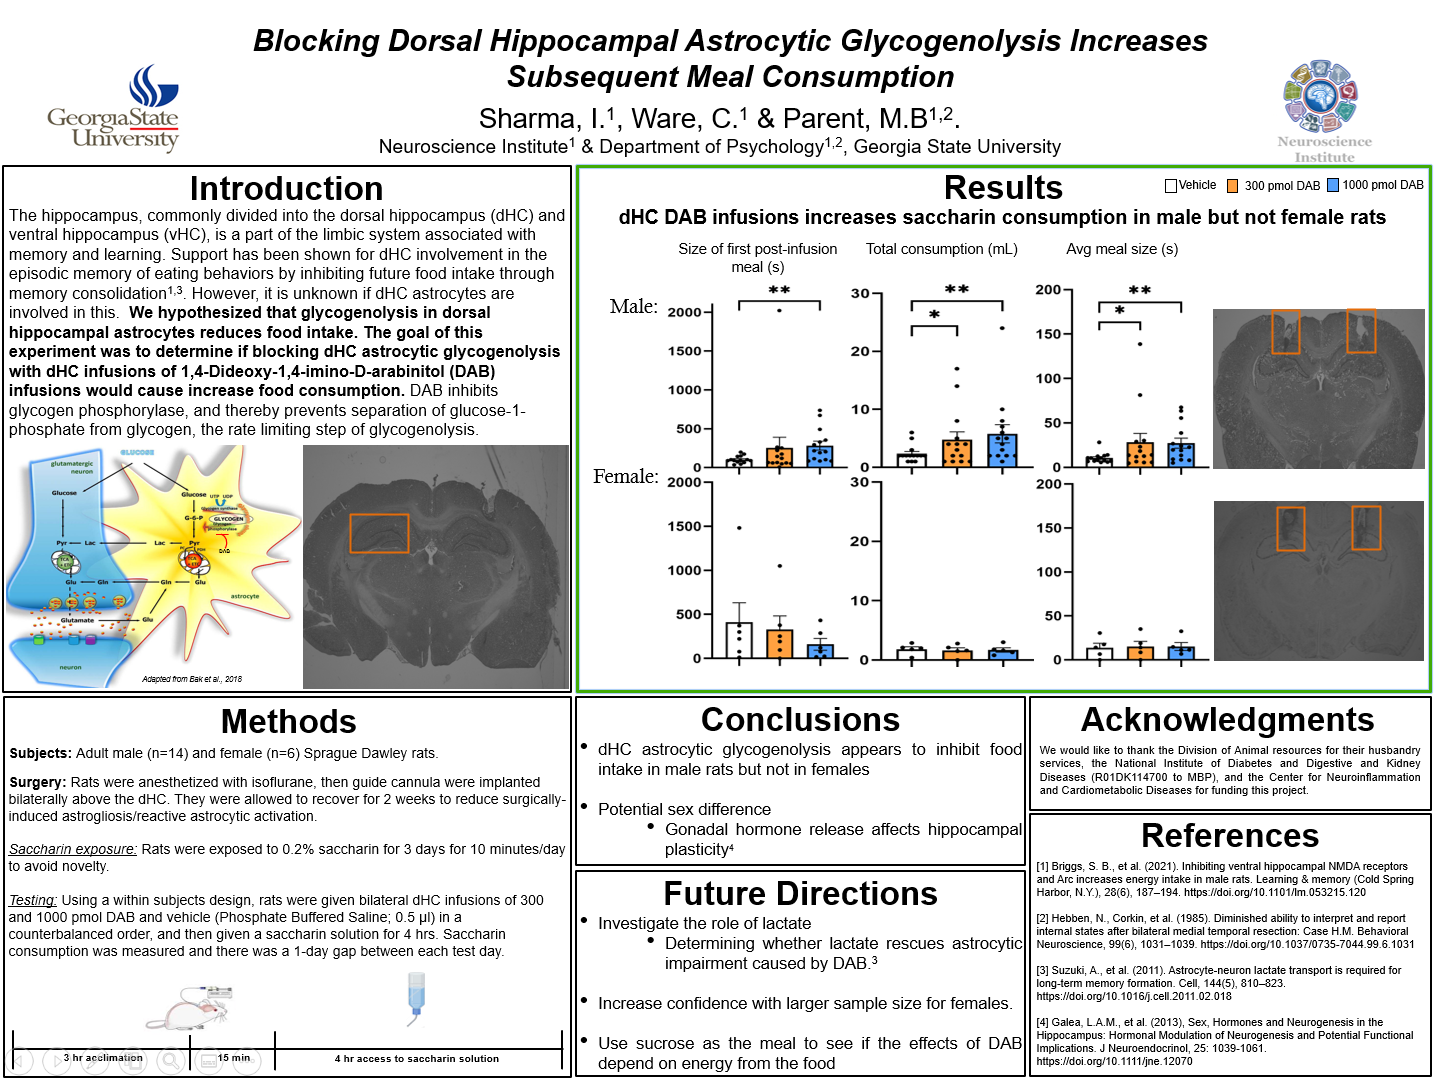 Showcase Image for Blocking Dorsal Hippocampal Astrocytic Glycogenolysis Increases Subsequent Meal Consumption